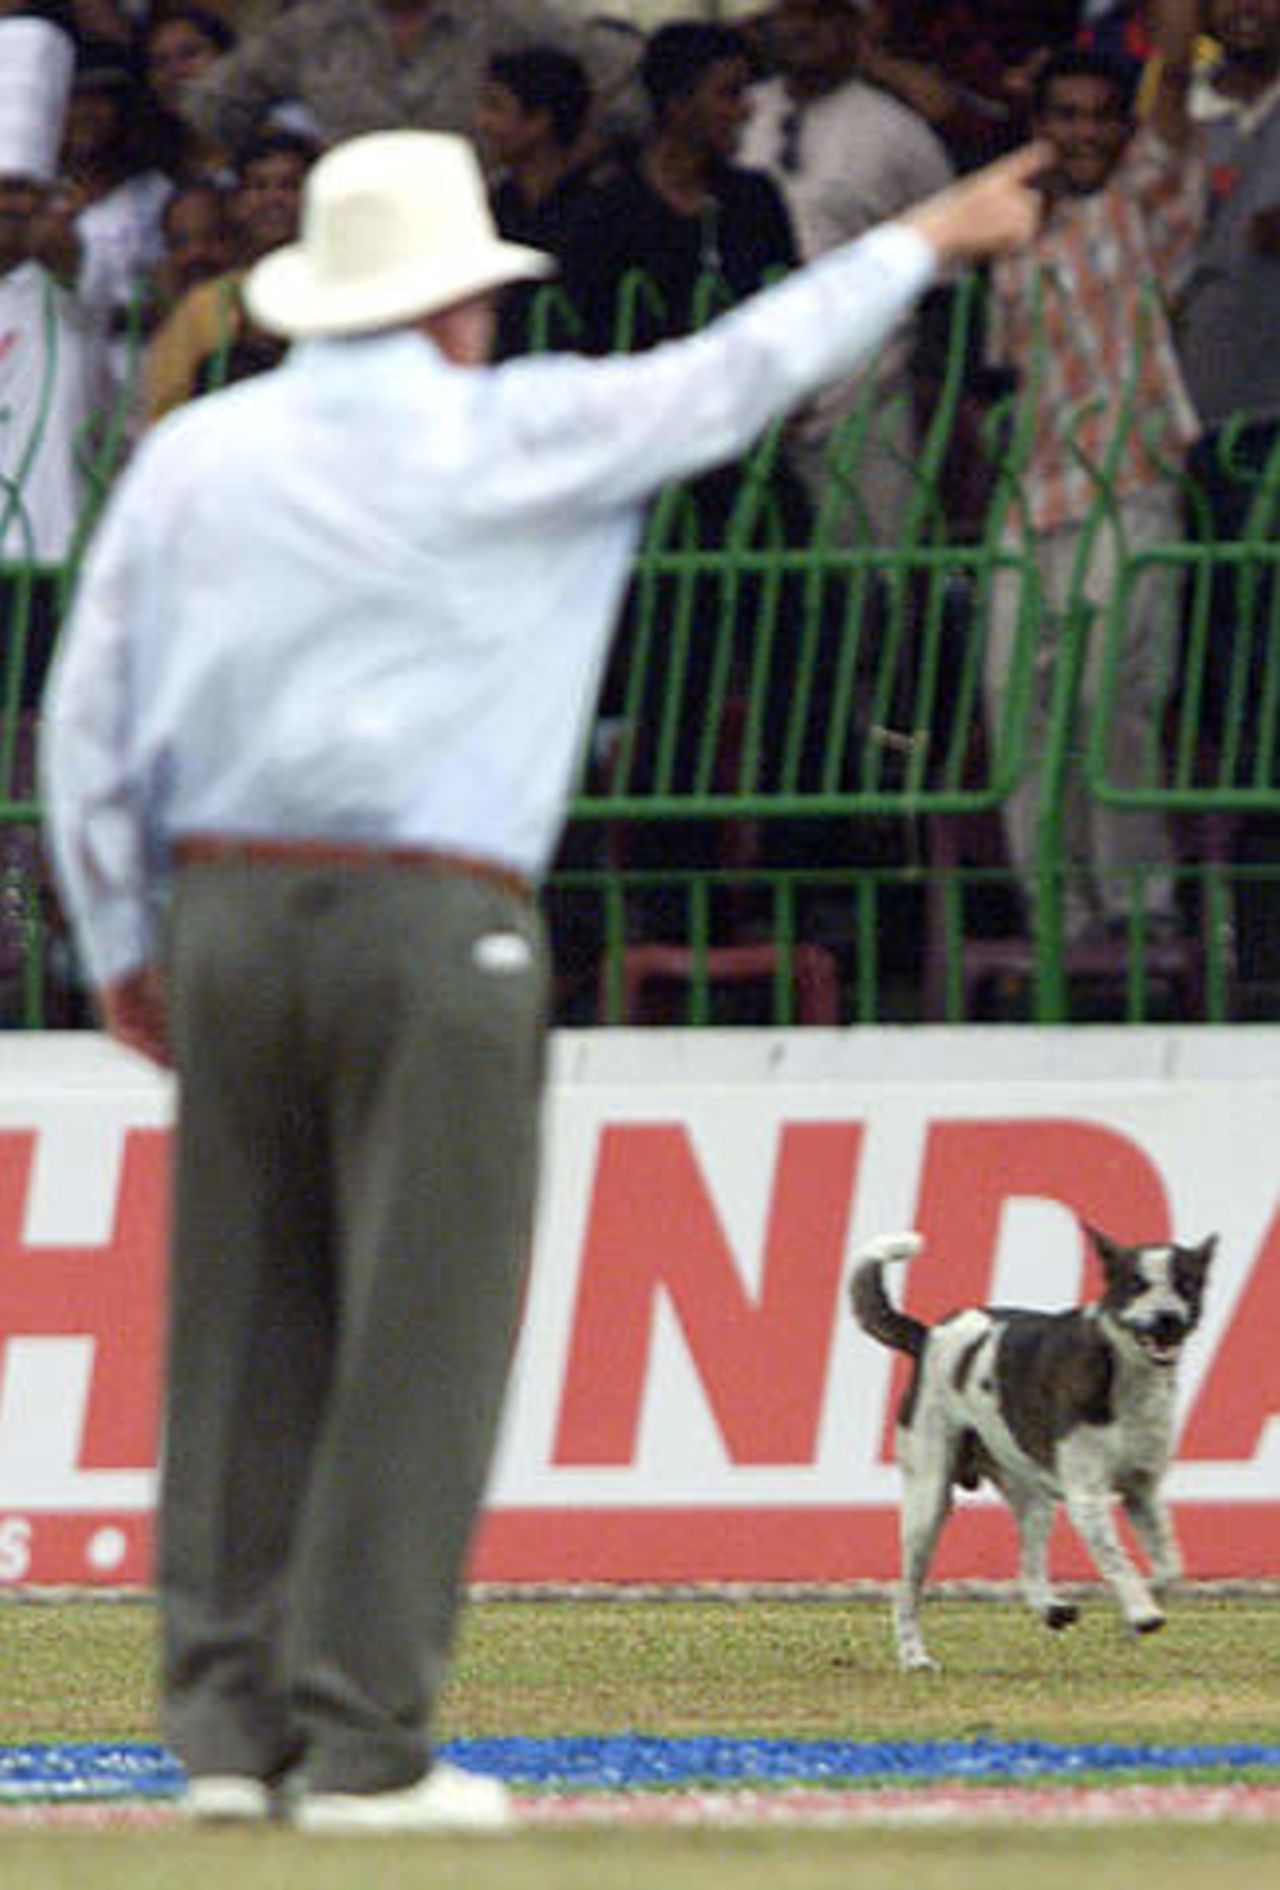 Shepherd gives marching orders to an unwanted on-field visitor during the
Champions Trophy finals between Sri Lanka and India in Colombo, September
30, 2002